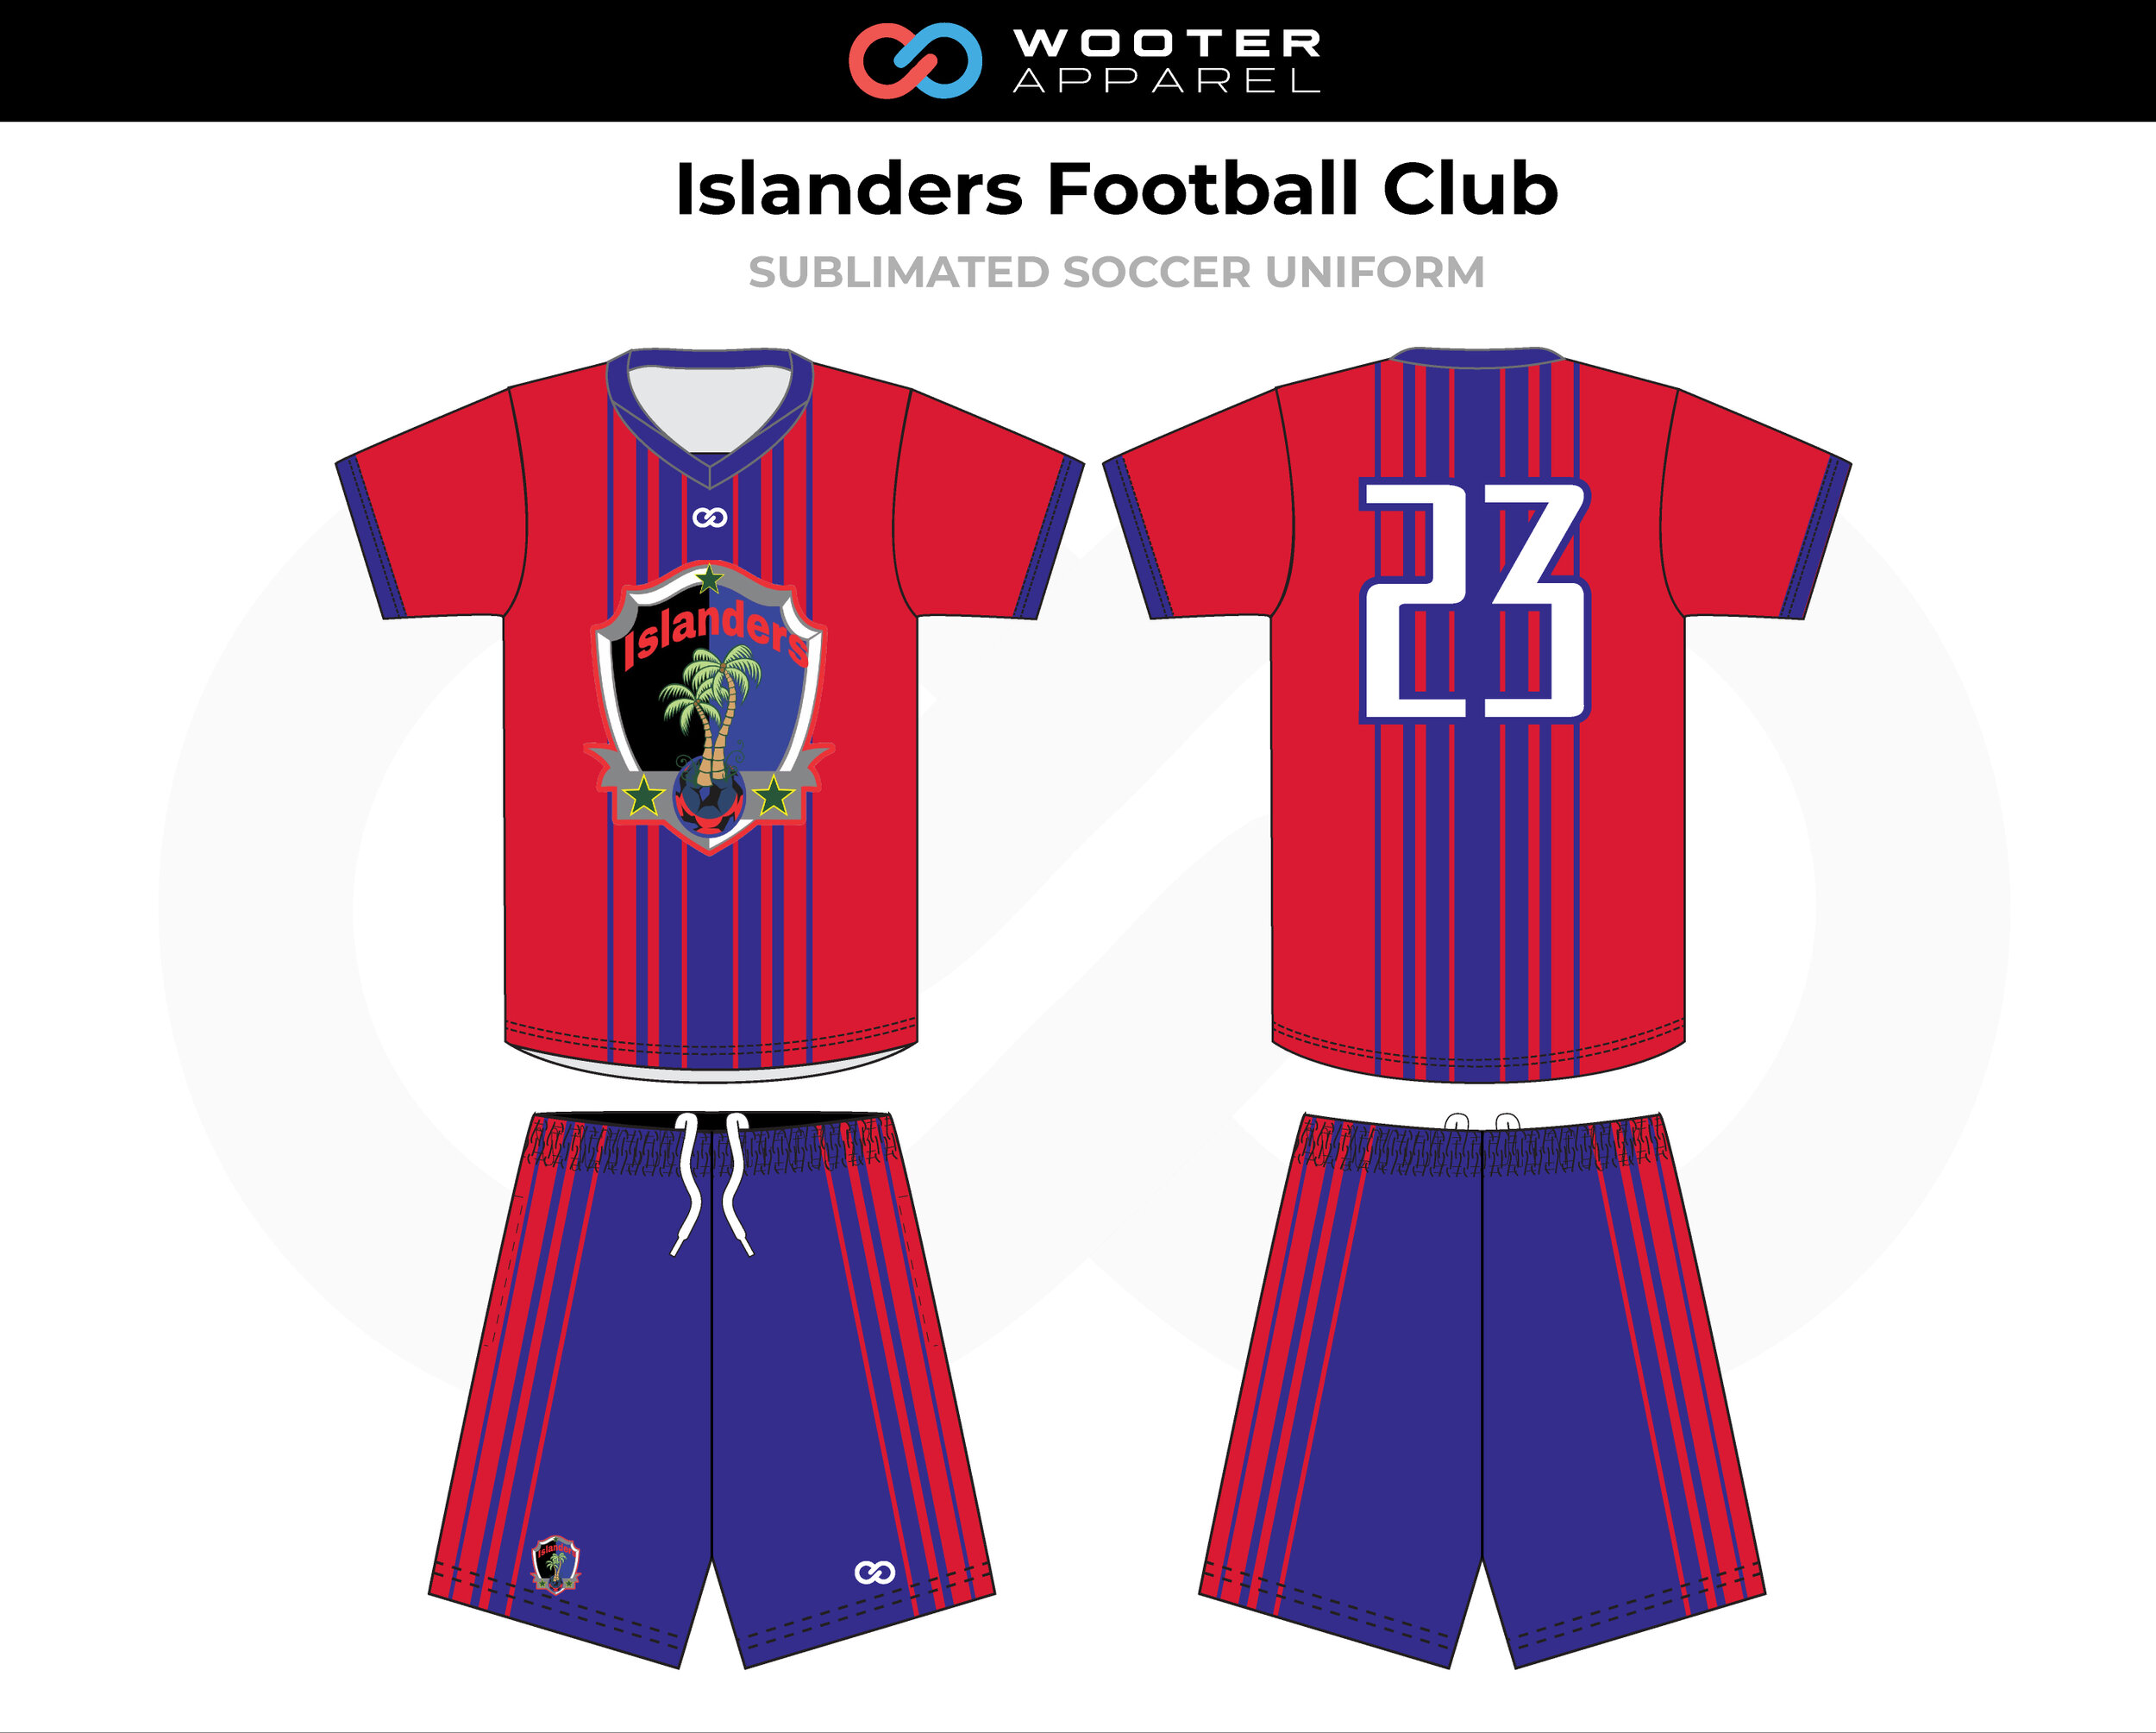 Shorts Socks Logos Details about   Soccer Uniforms: $21 each Jersey with numbers 